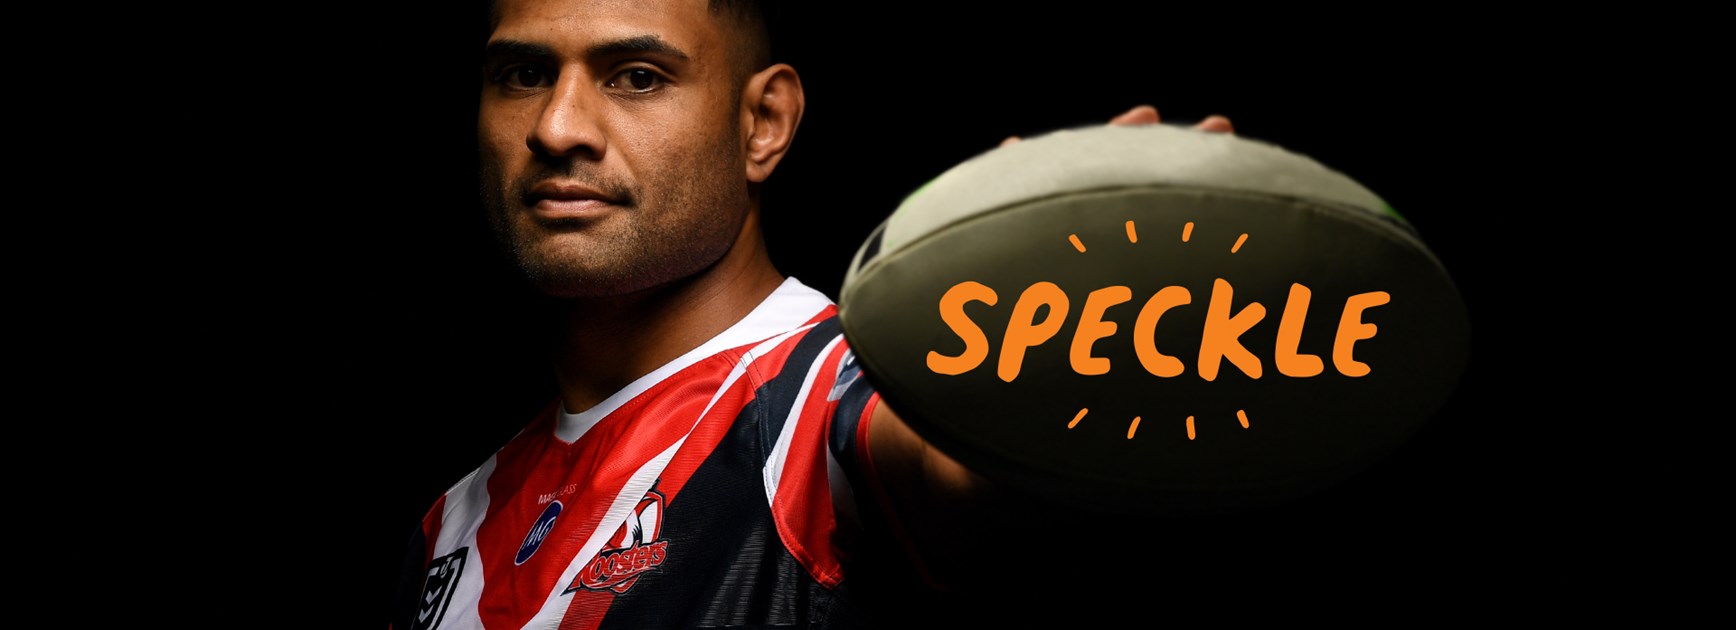 Speckle partner with the Roosters